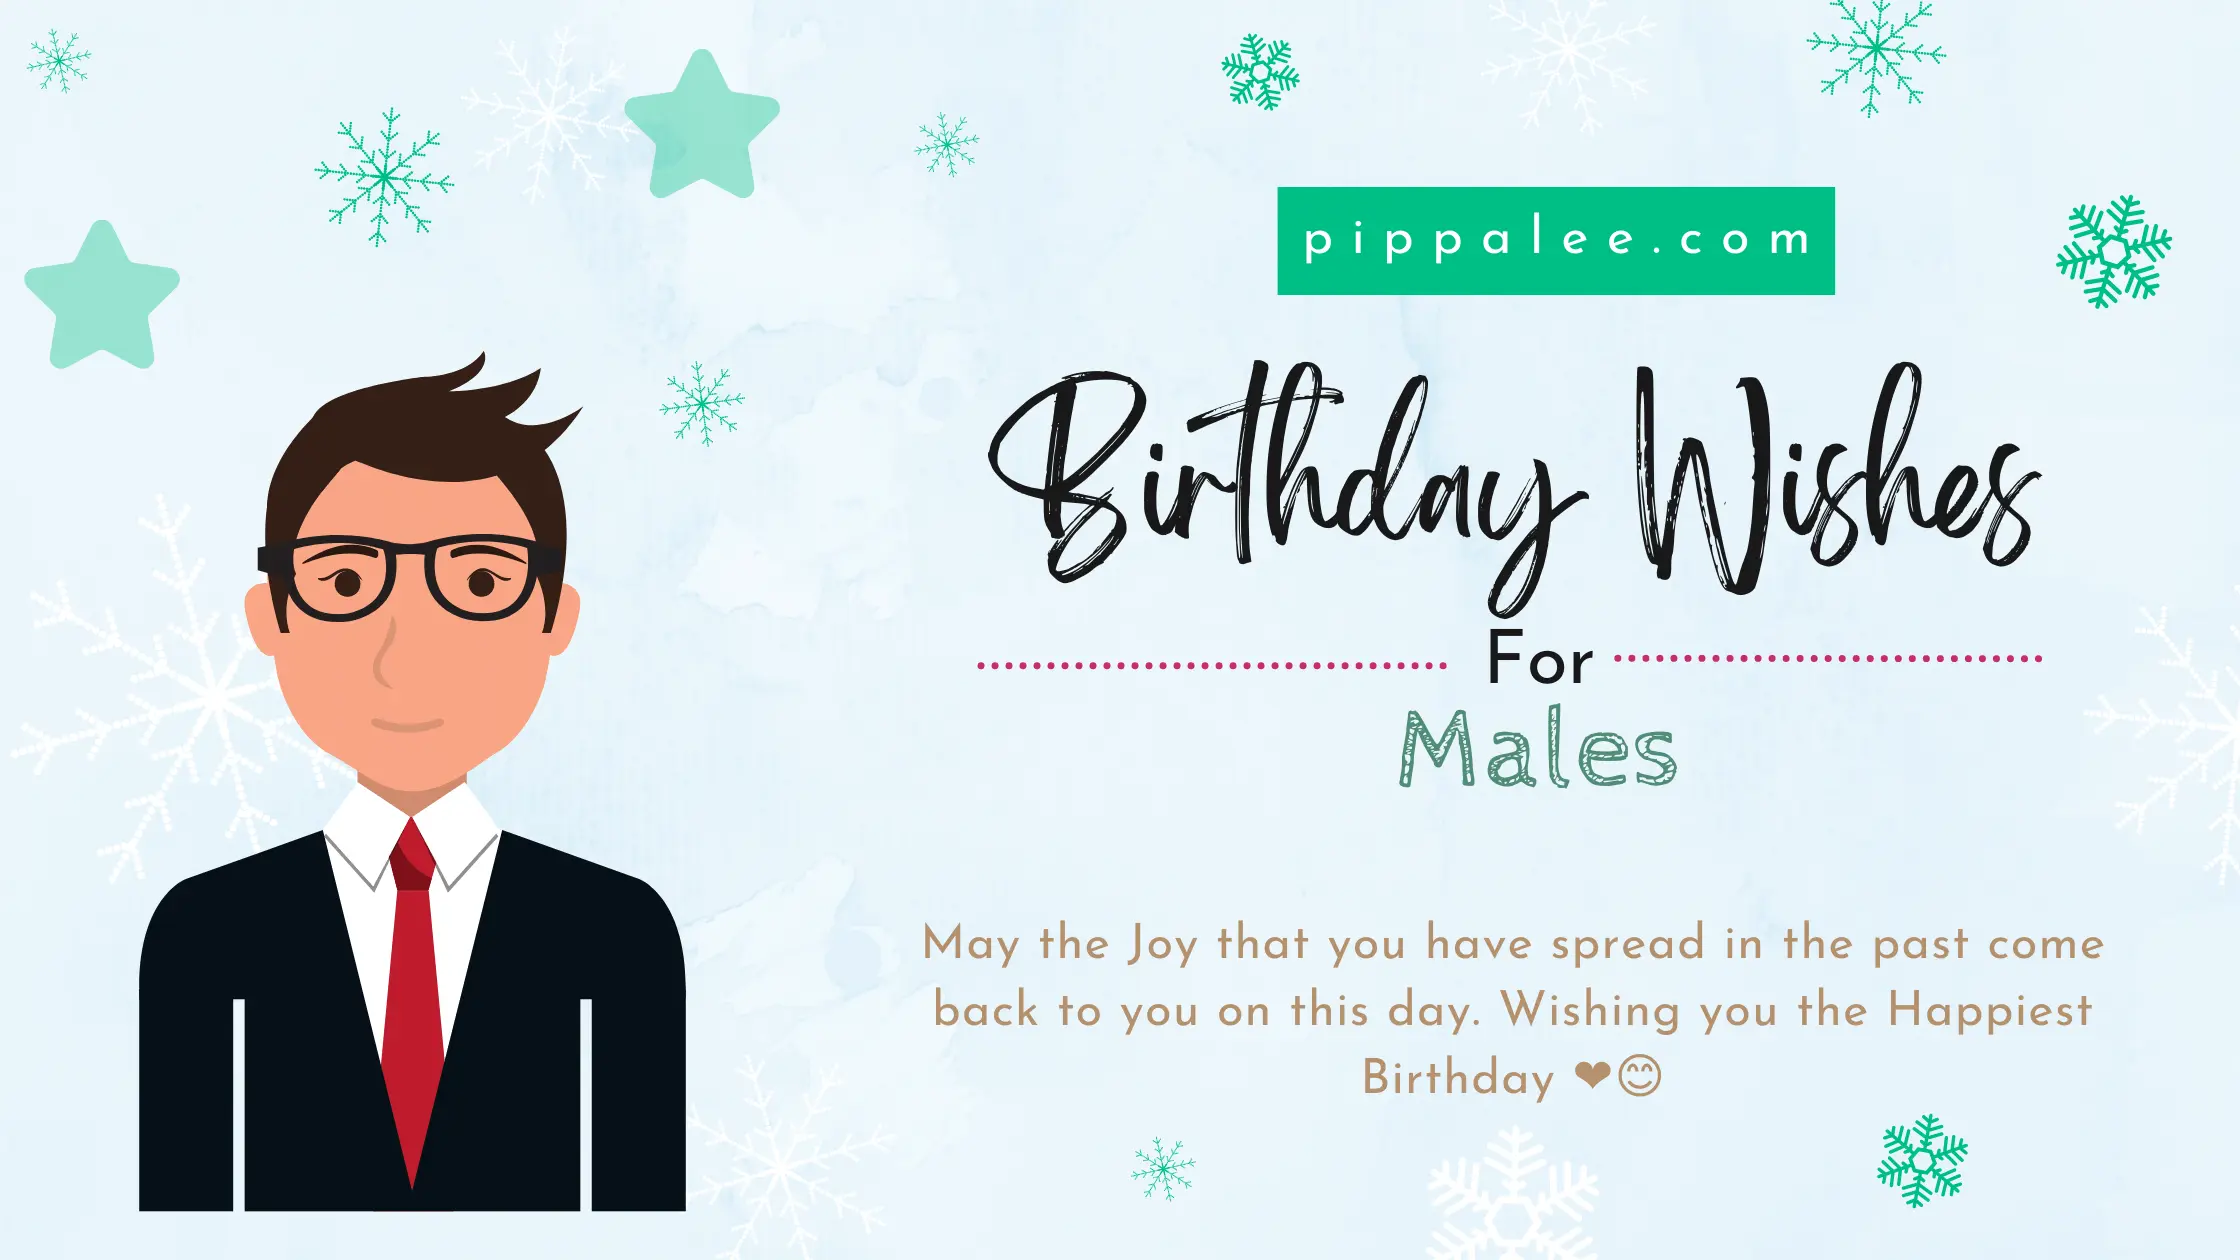 Birthday Wishes For Males - Special Messages